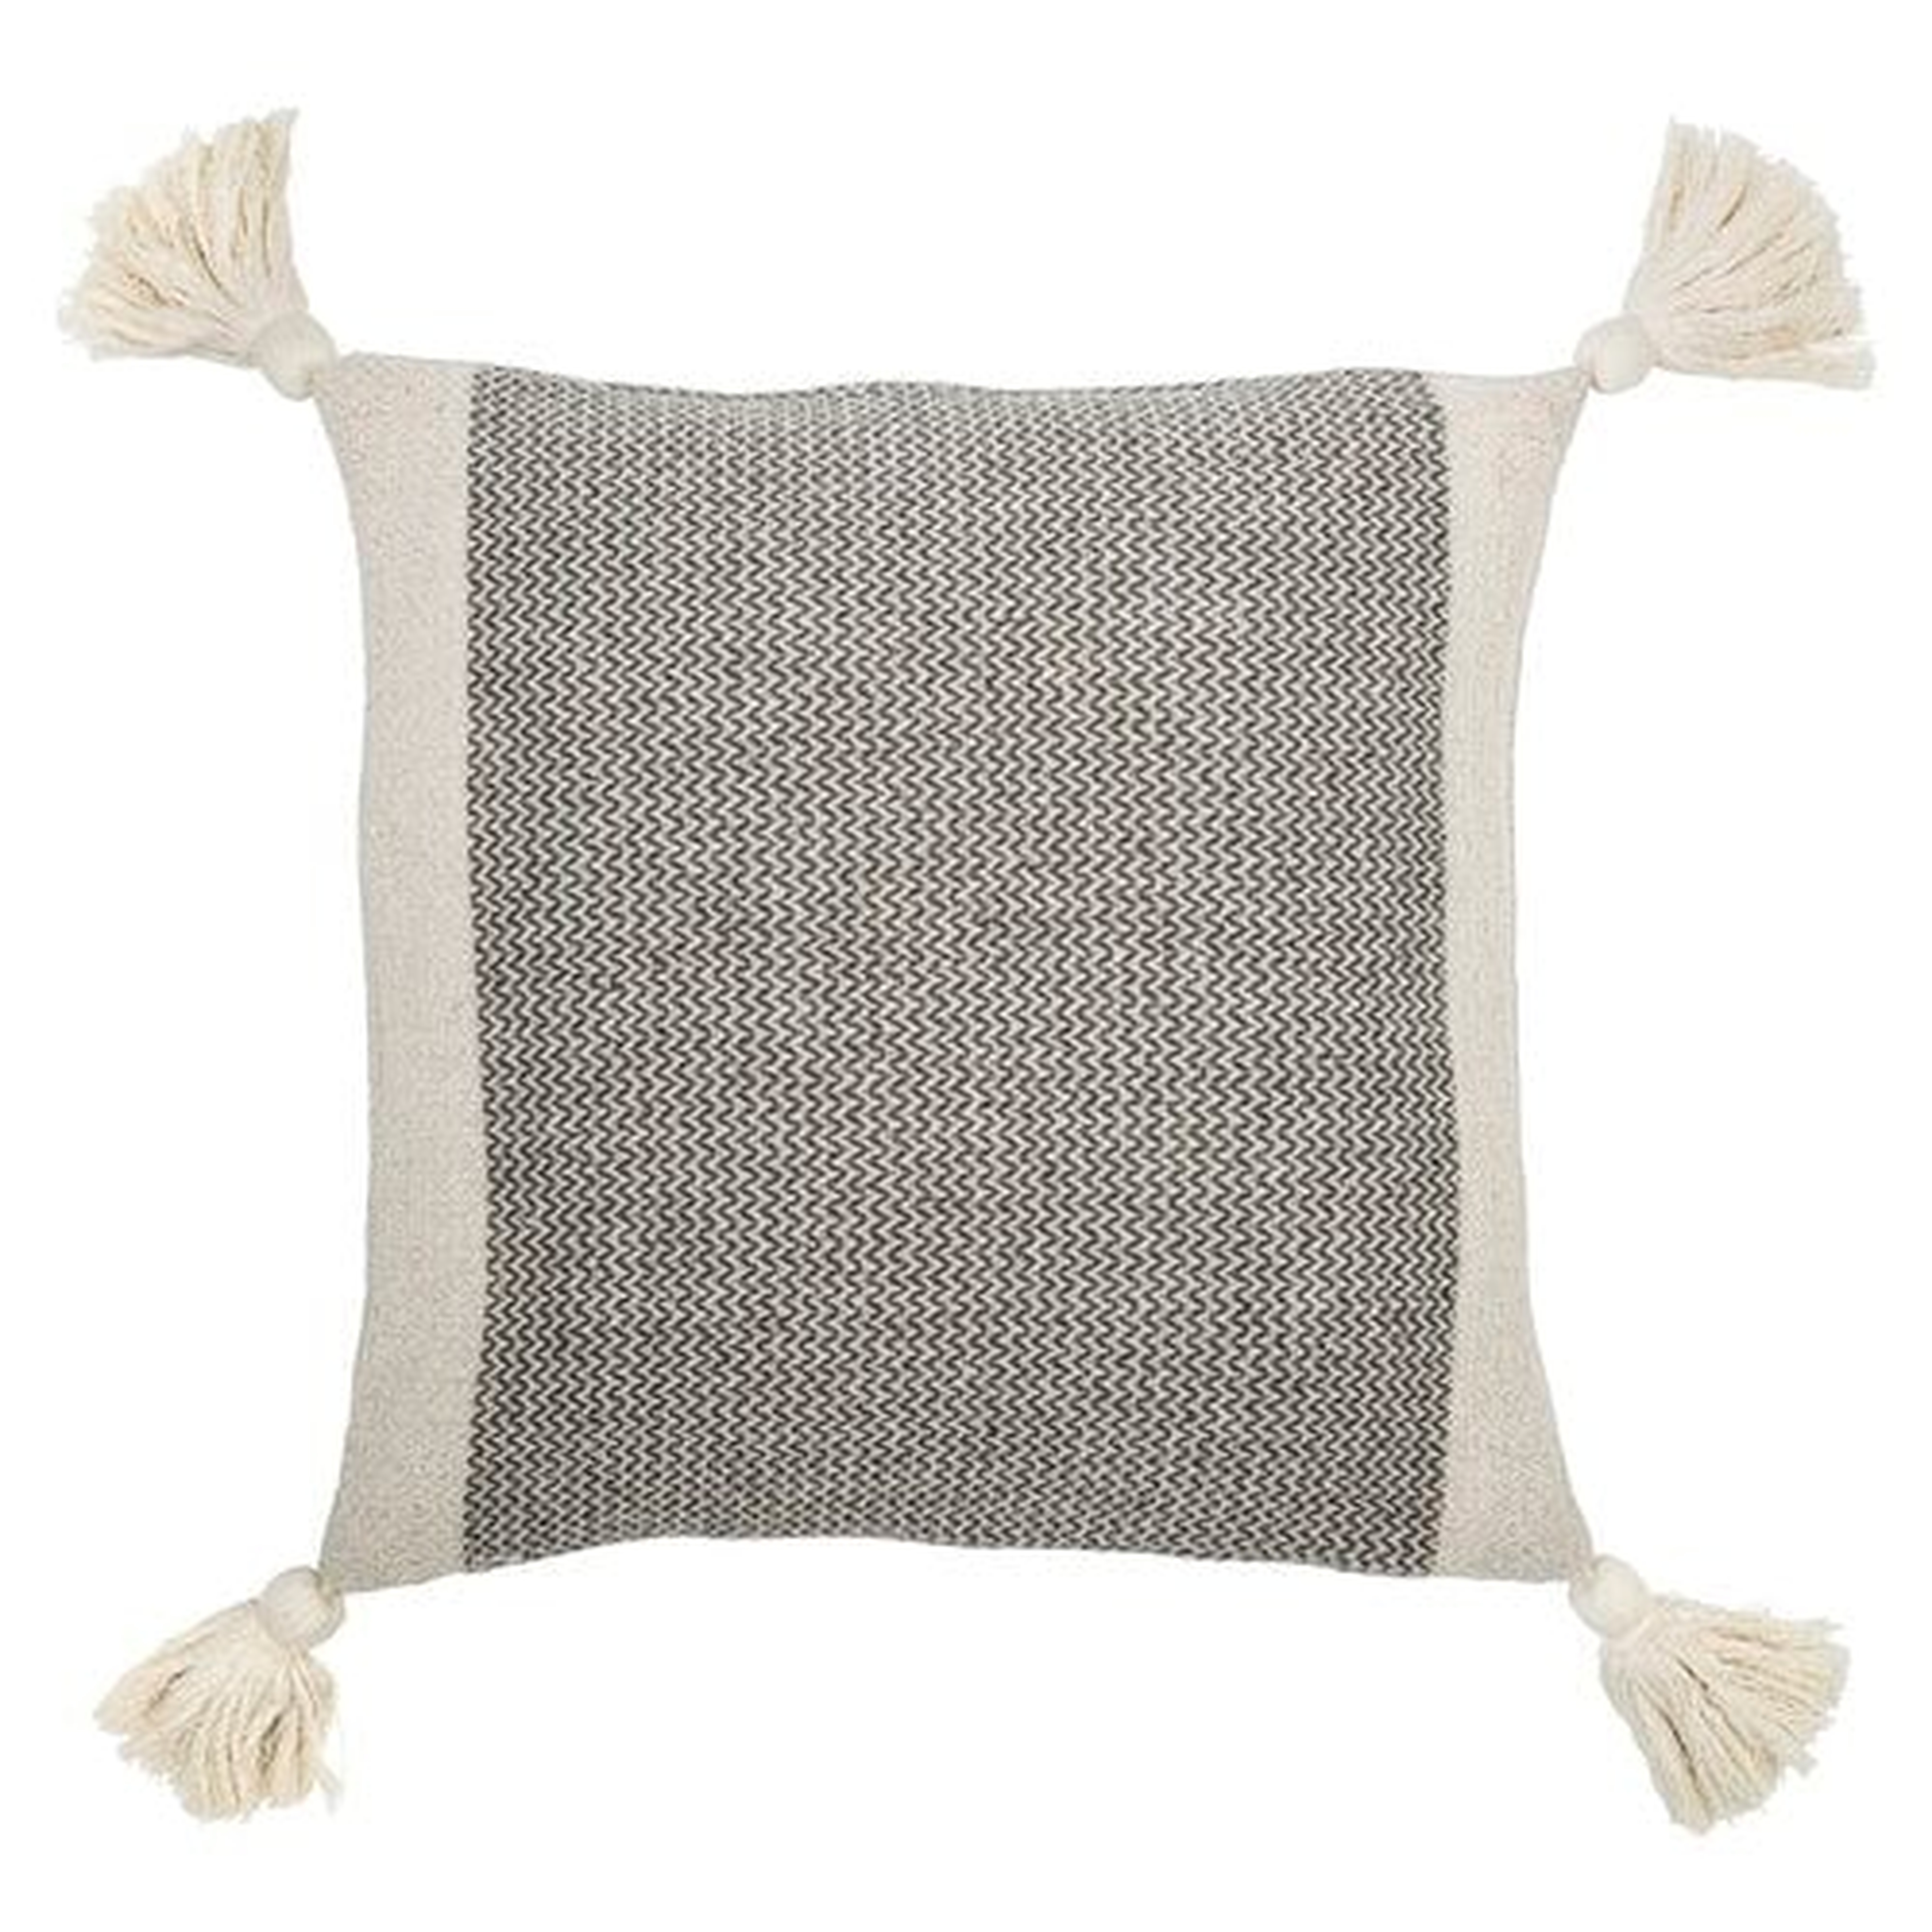 Said Square Pillow Cover and Insert - AllModern